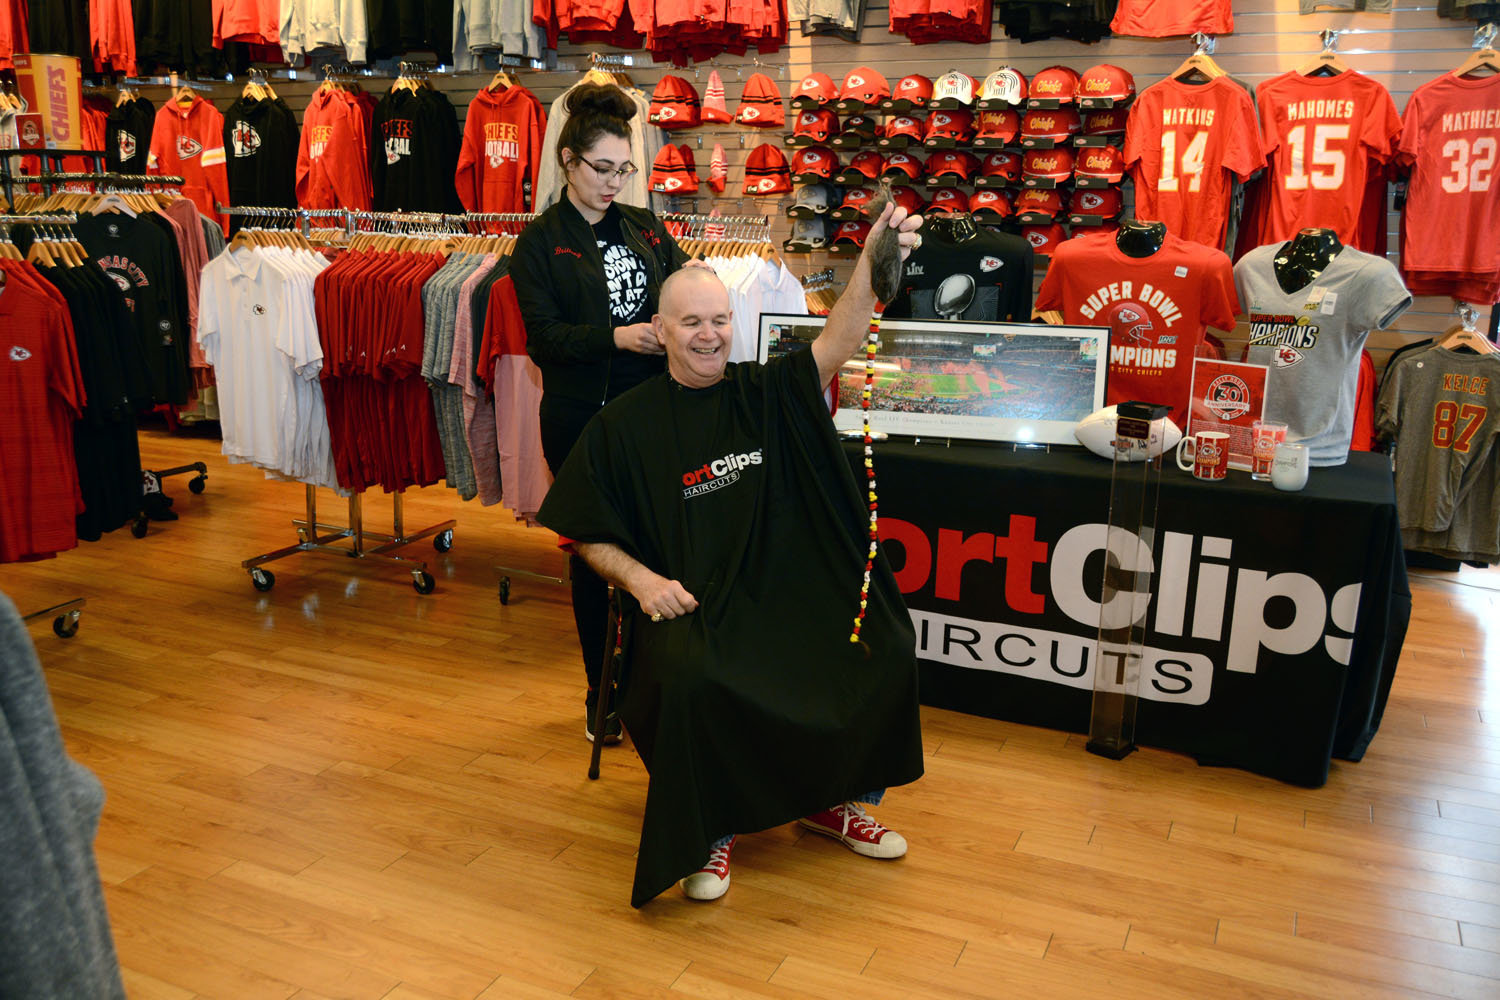 HISTORIC HAIRCUT
Diehard Kansas City Chiefs fan Loy Baker gets his head shaved days after the team’s Super Bowl victory. Baker hadn’t cut his hair in 25 years, keeping a vow he made after the Chiefs lost in the 1995 playoffs; the team had to win the title before he’d trim his locks – now a 32-inch ponytail. The crew from Sport Clips met Baker at the Rally Sports store to perform the historic cut.